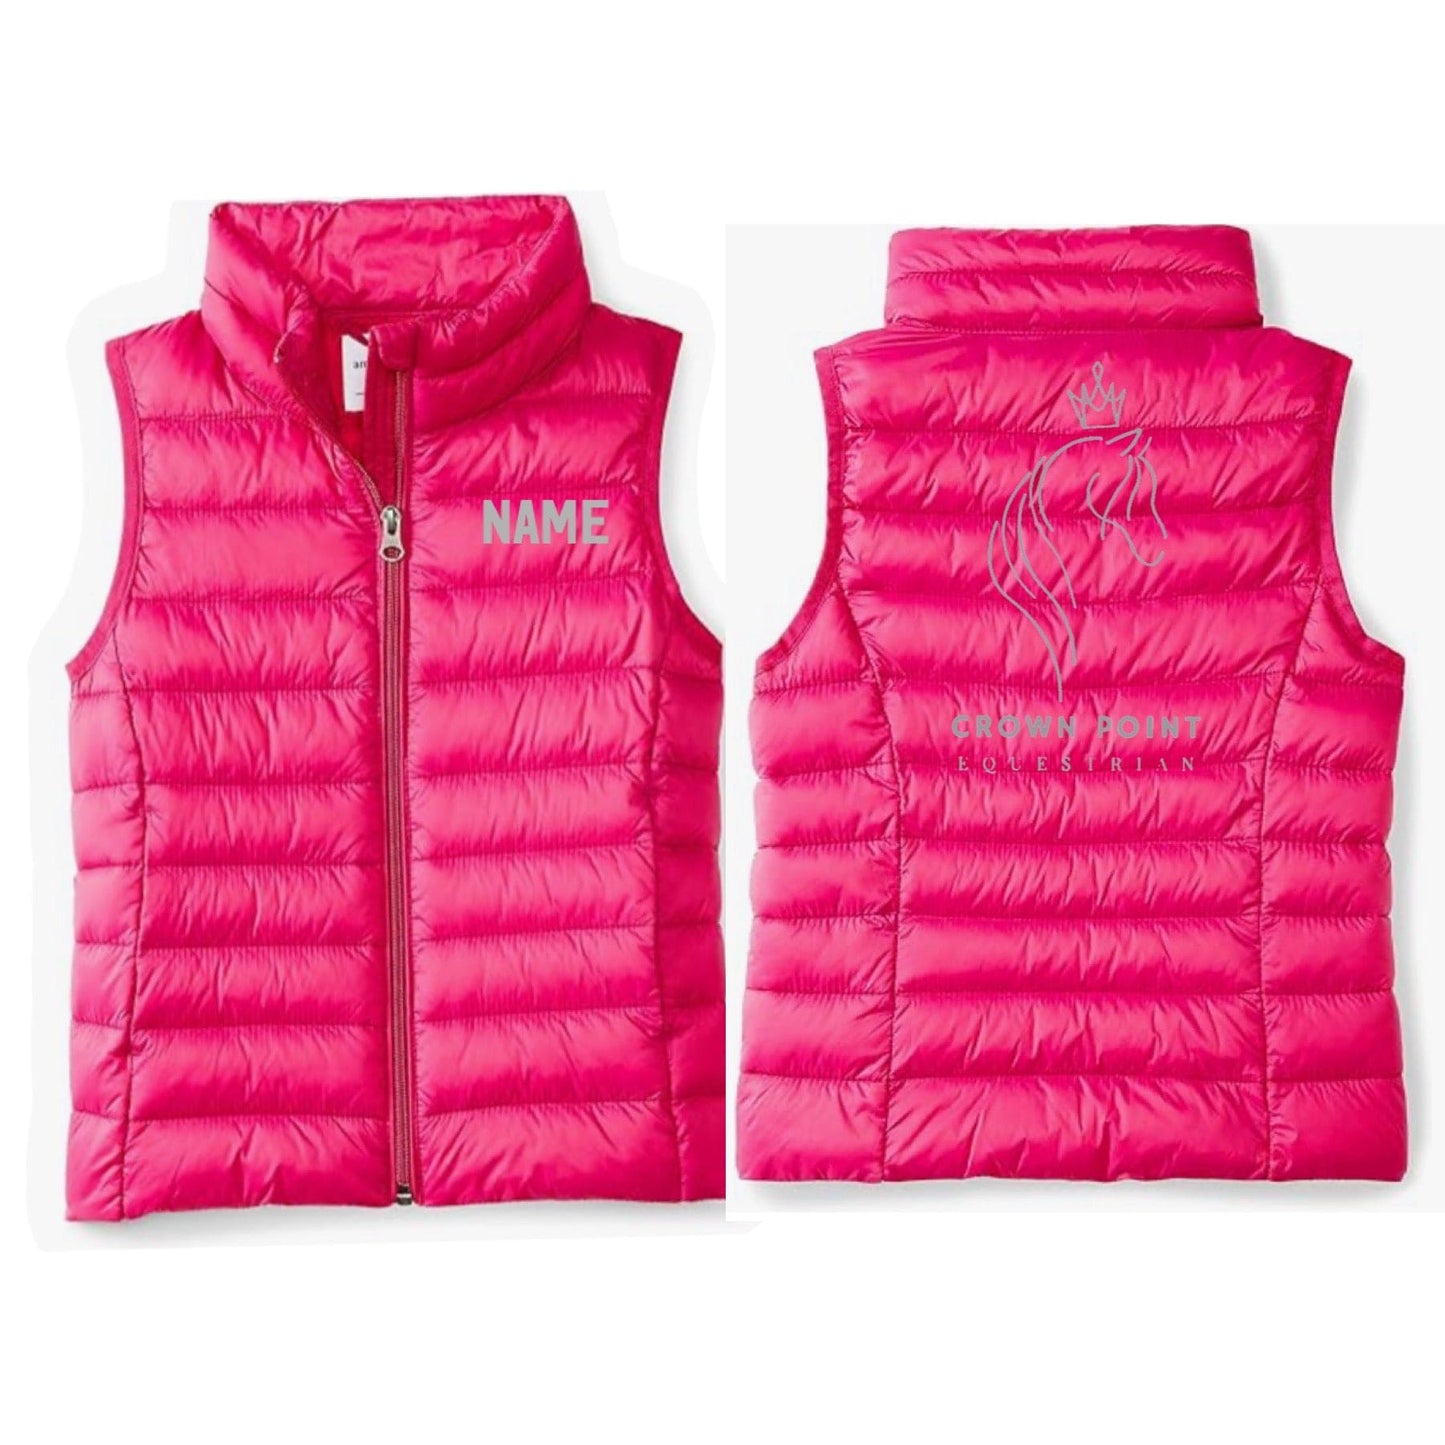 Equestrian Team Apparel Crown Point Equestrian Vest equestrian team apparel online tack store mobile tack store custom farm apparel custom show stable clothing equestrian lifestyle horse show clothing riding clothes horses equestrian tack store